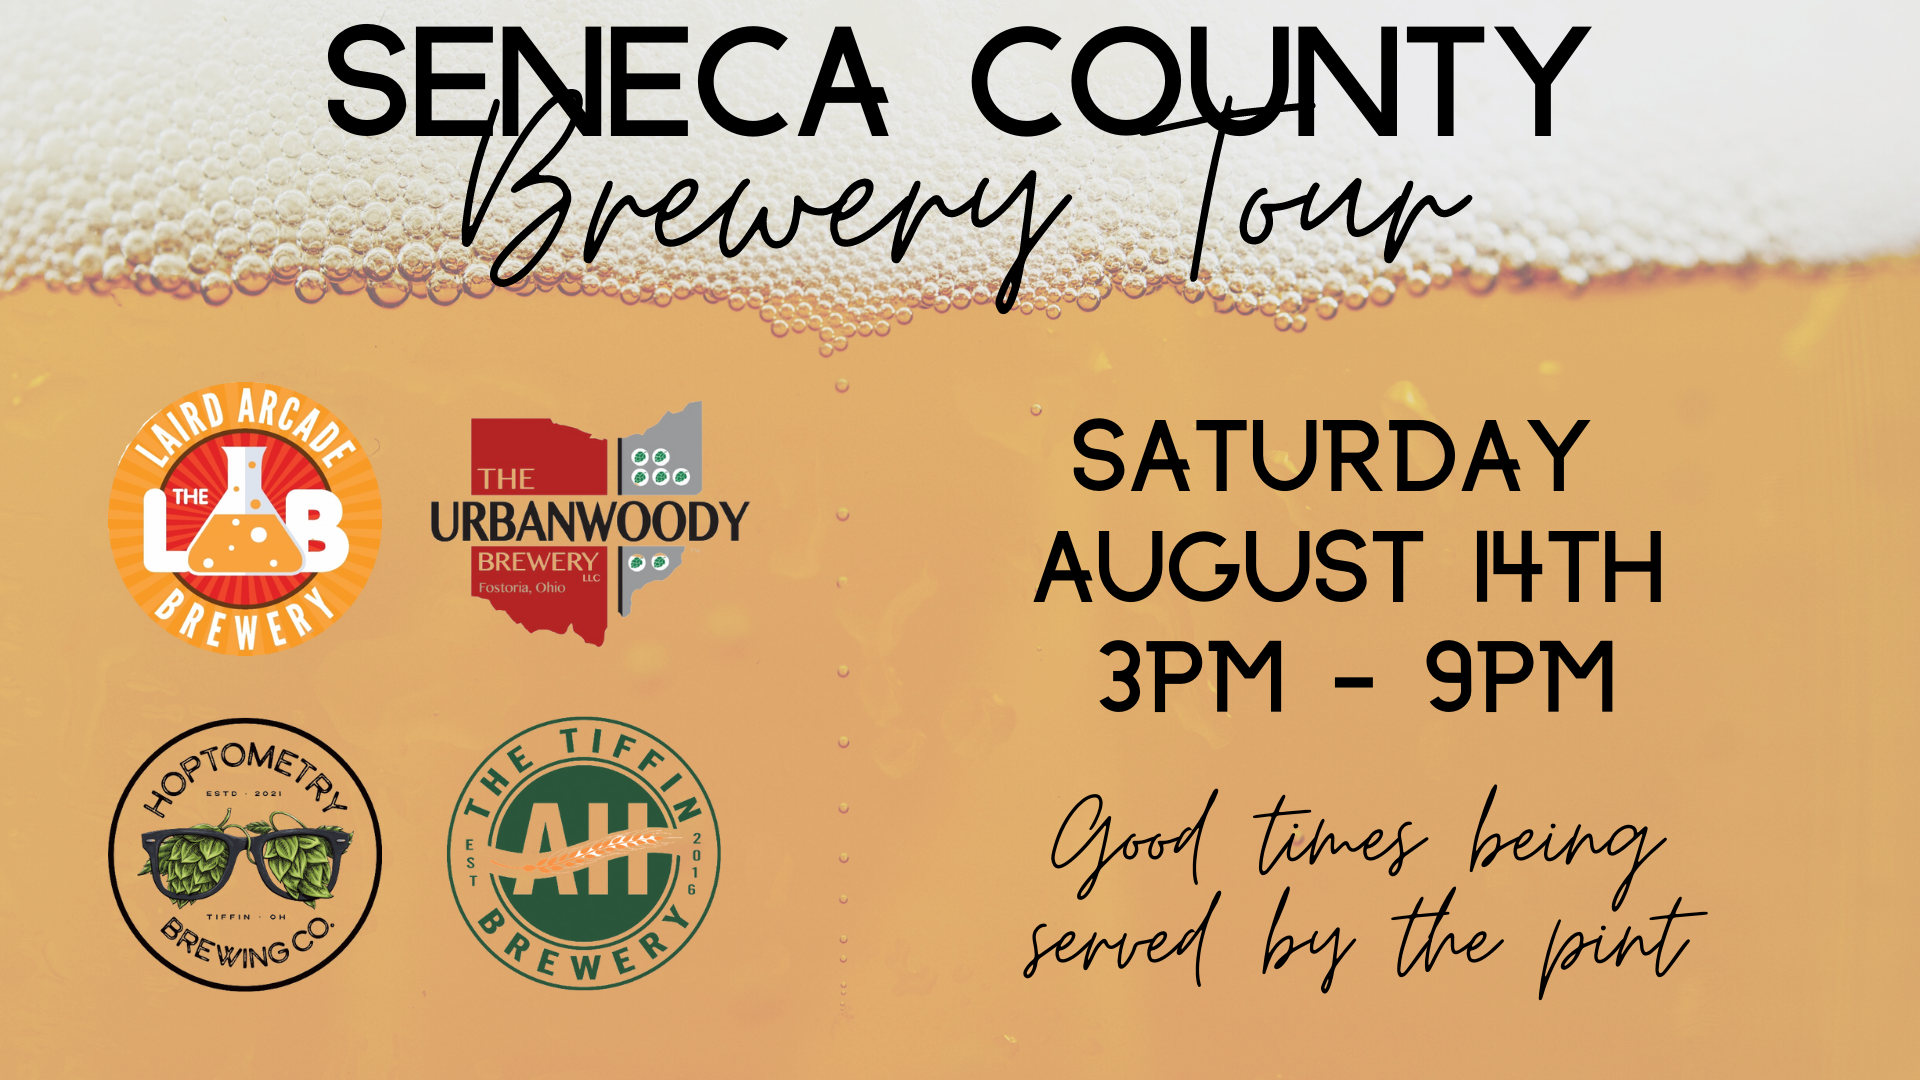 Seneca County Brewery Tour Announced Featuring Local Breweries